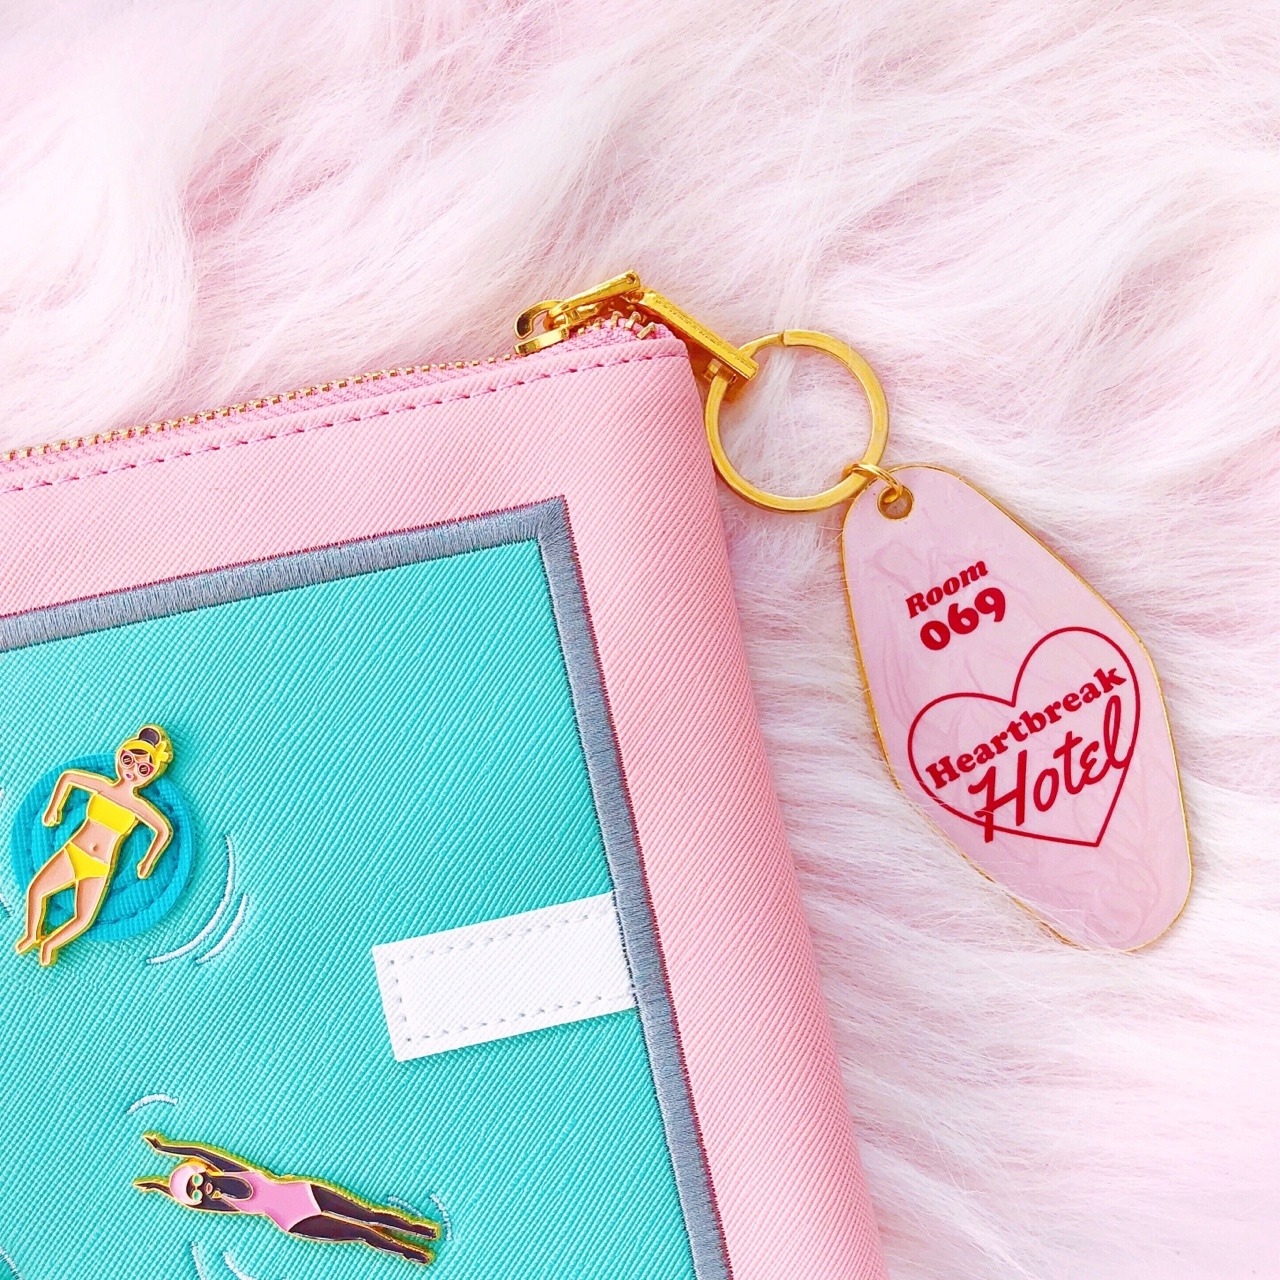 Bobby Pins Co Heartbreak Hotel Keychains By Http Bobbypins Co